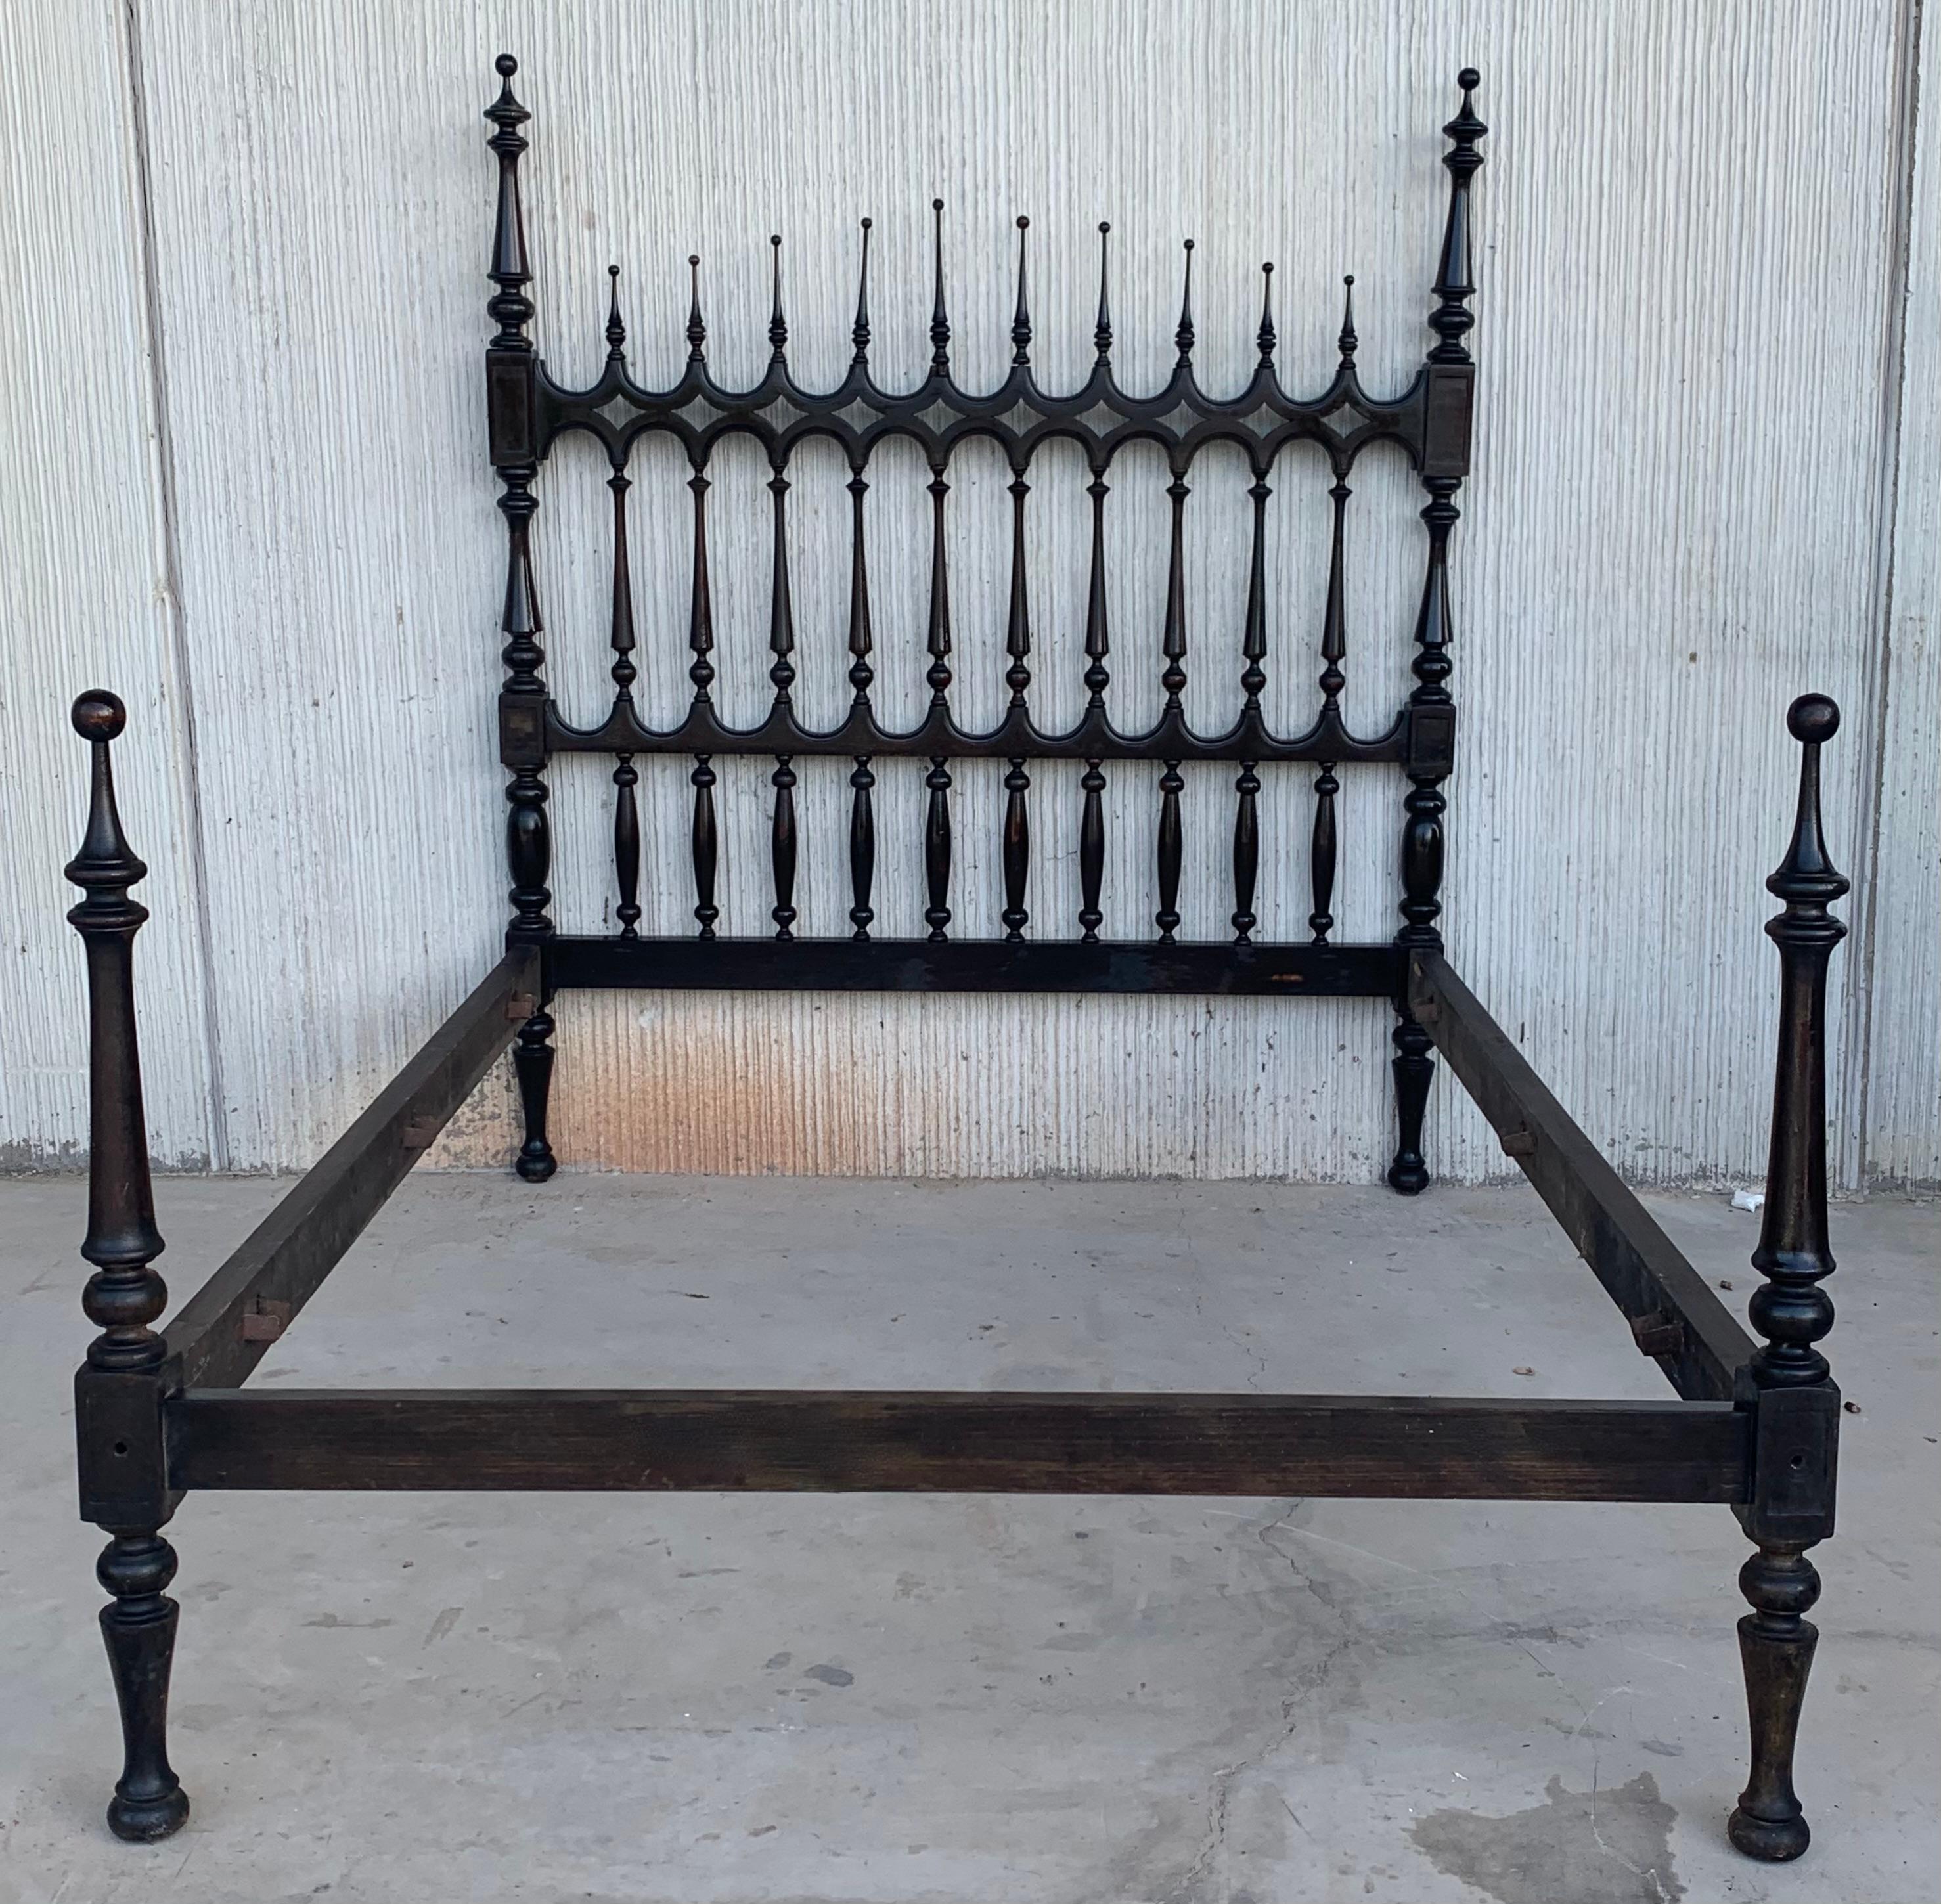 19th century Baroque bed, original Lisbon bed

The measurements you can see in the listing is only for the shipping, the 

This Queen size 4-poster bed is hand carved with elaborate details, spiral turned post, 3D open spiral twist spindles, and